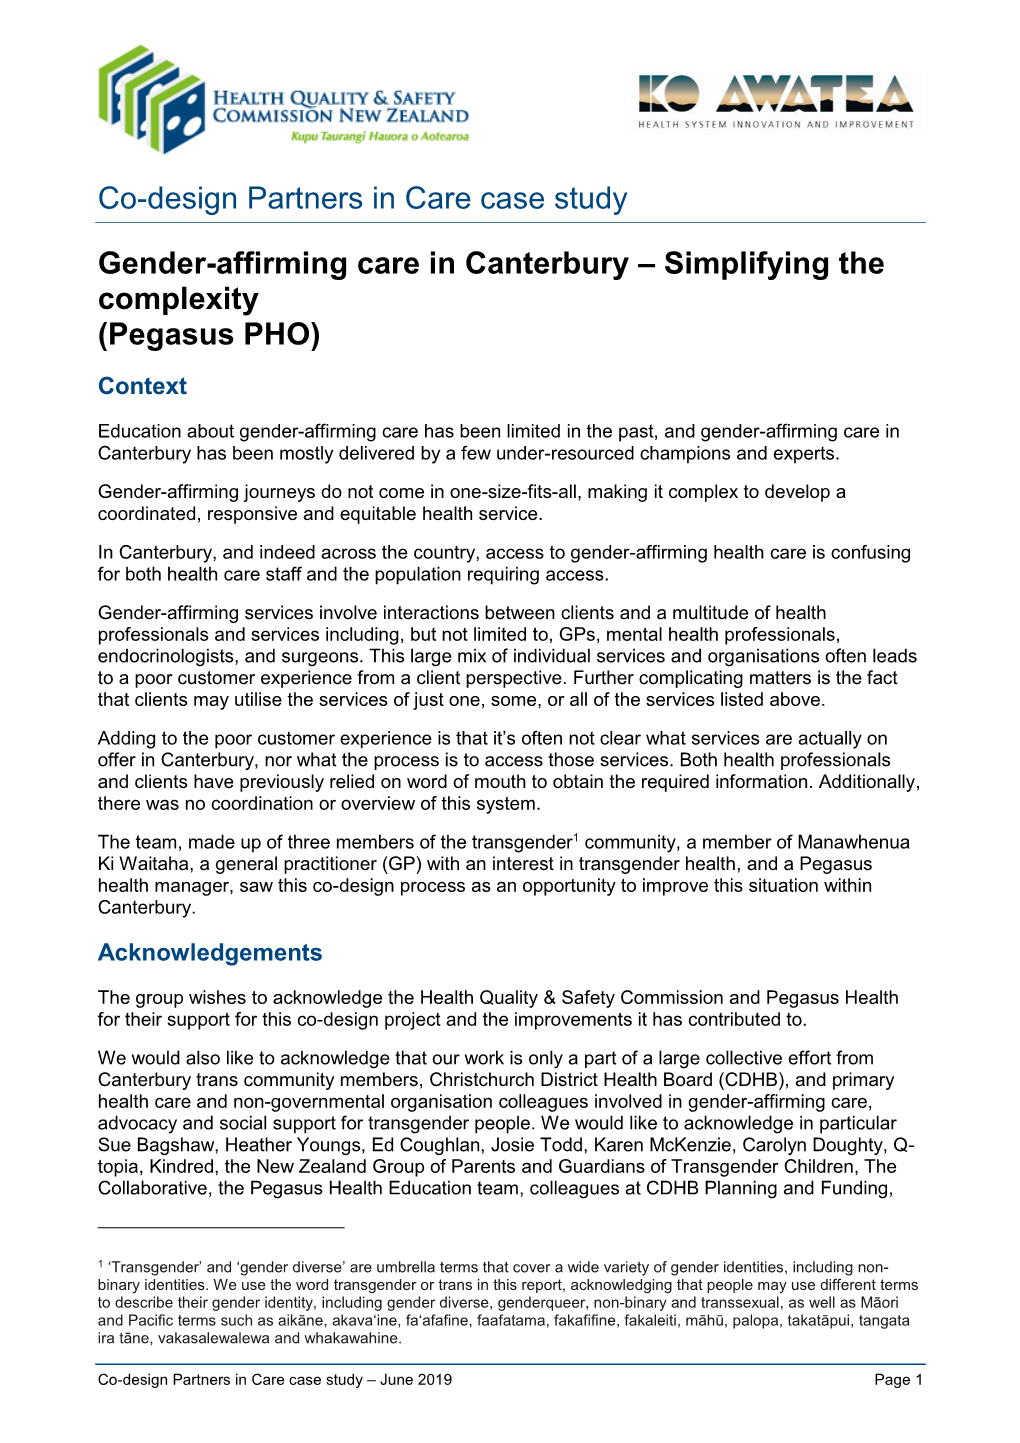 Gender-Affirming Care in Canterbury – Simplifying the Complexity (Pegasus PHO)